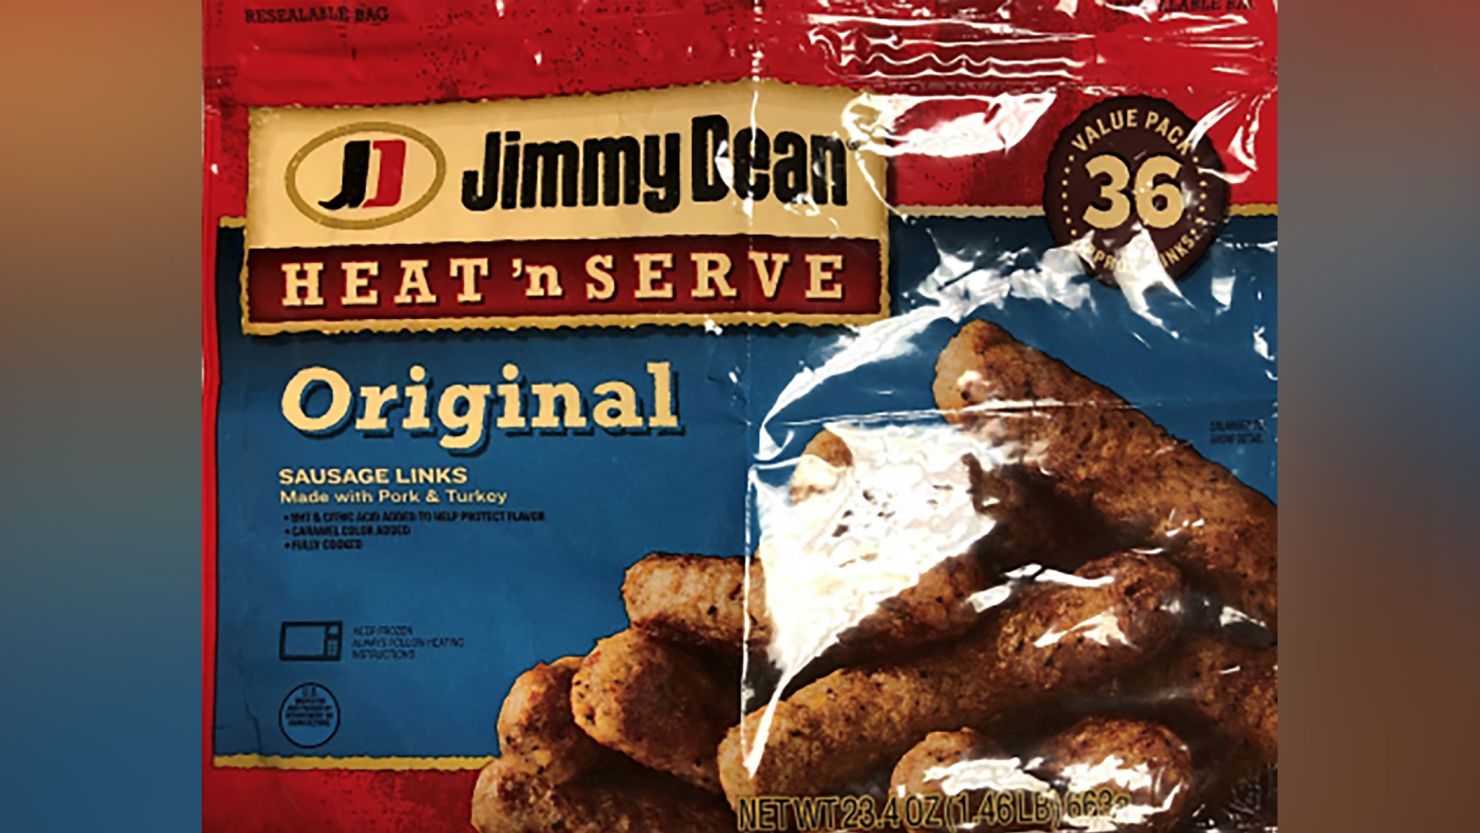 Jimmy Dean sausage recalled for having possible metal parts in it. 